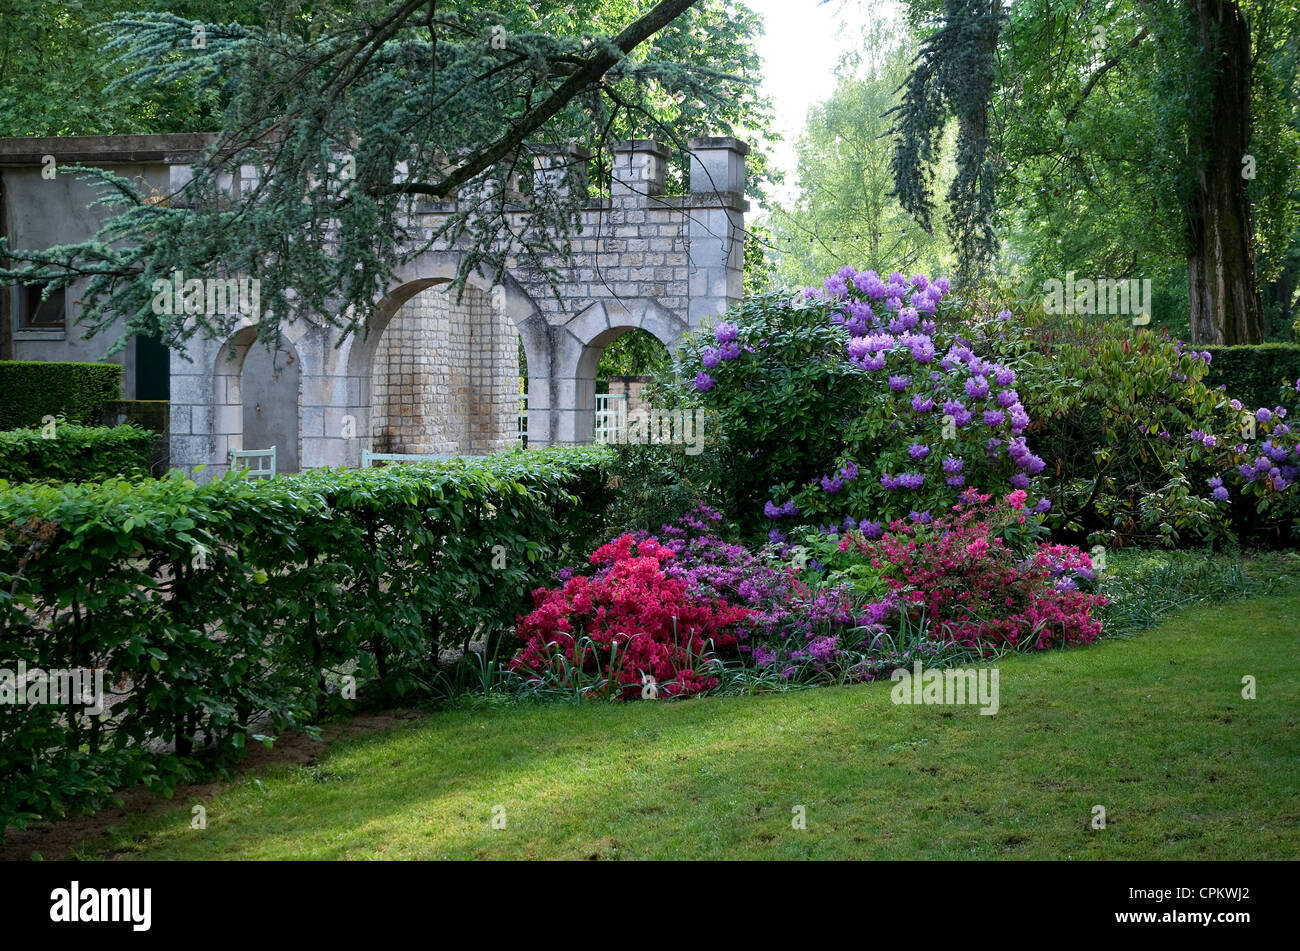 public park garden in bourges, france Stock Photo